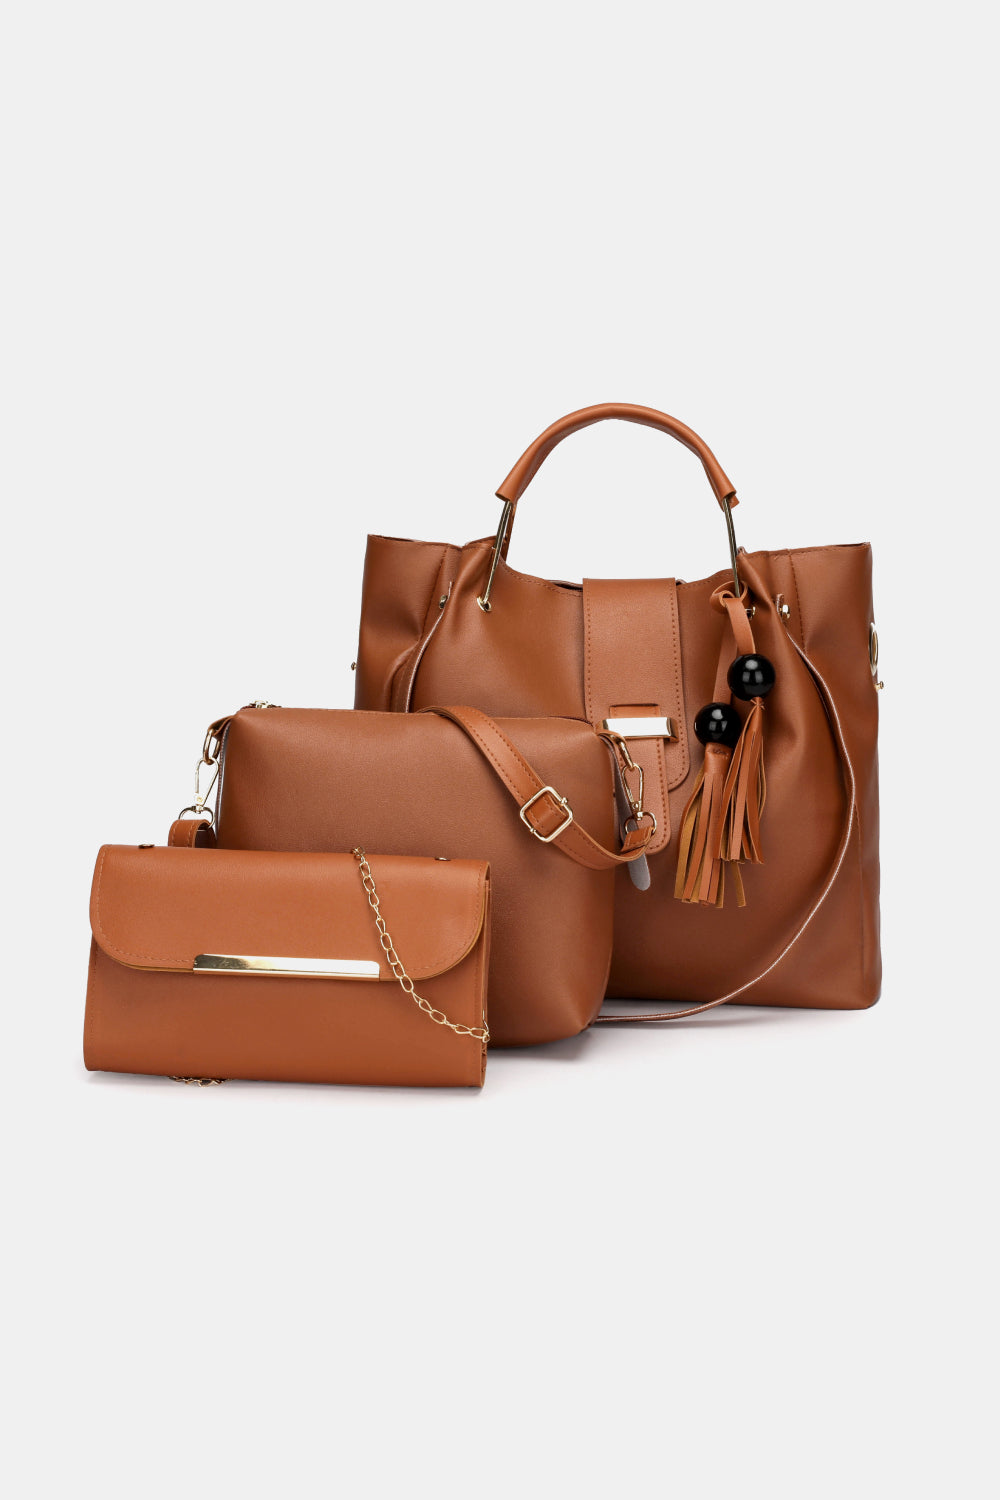 3-Piece Reconstituted Leather Leather Bag Set